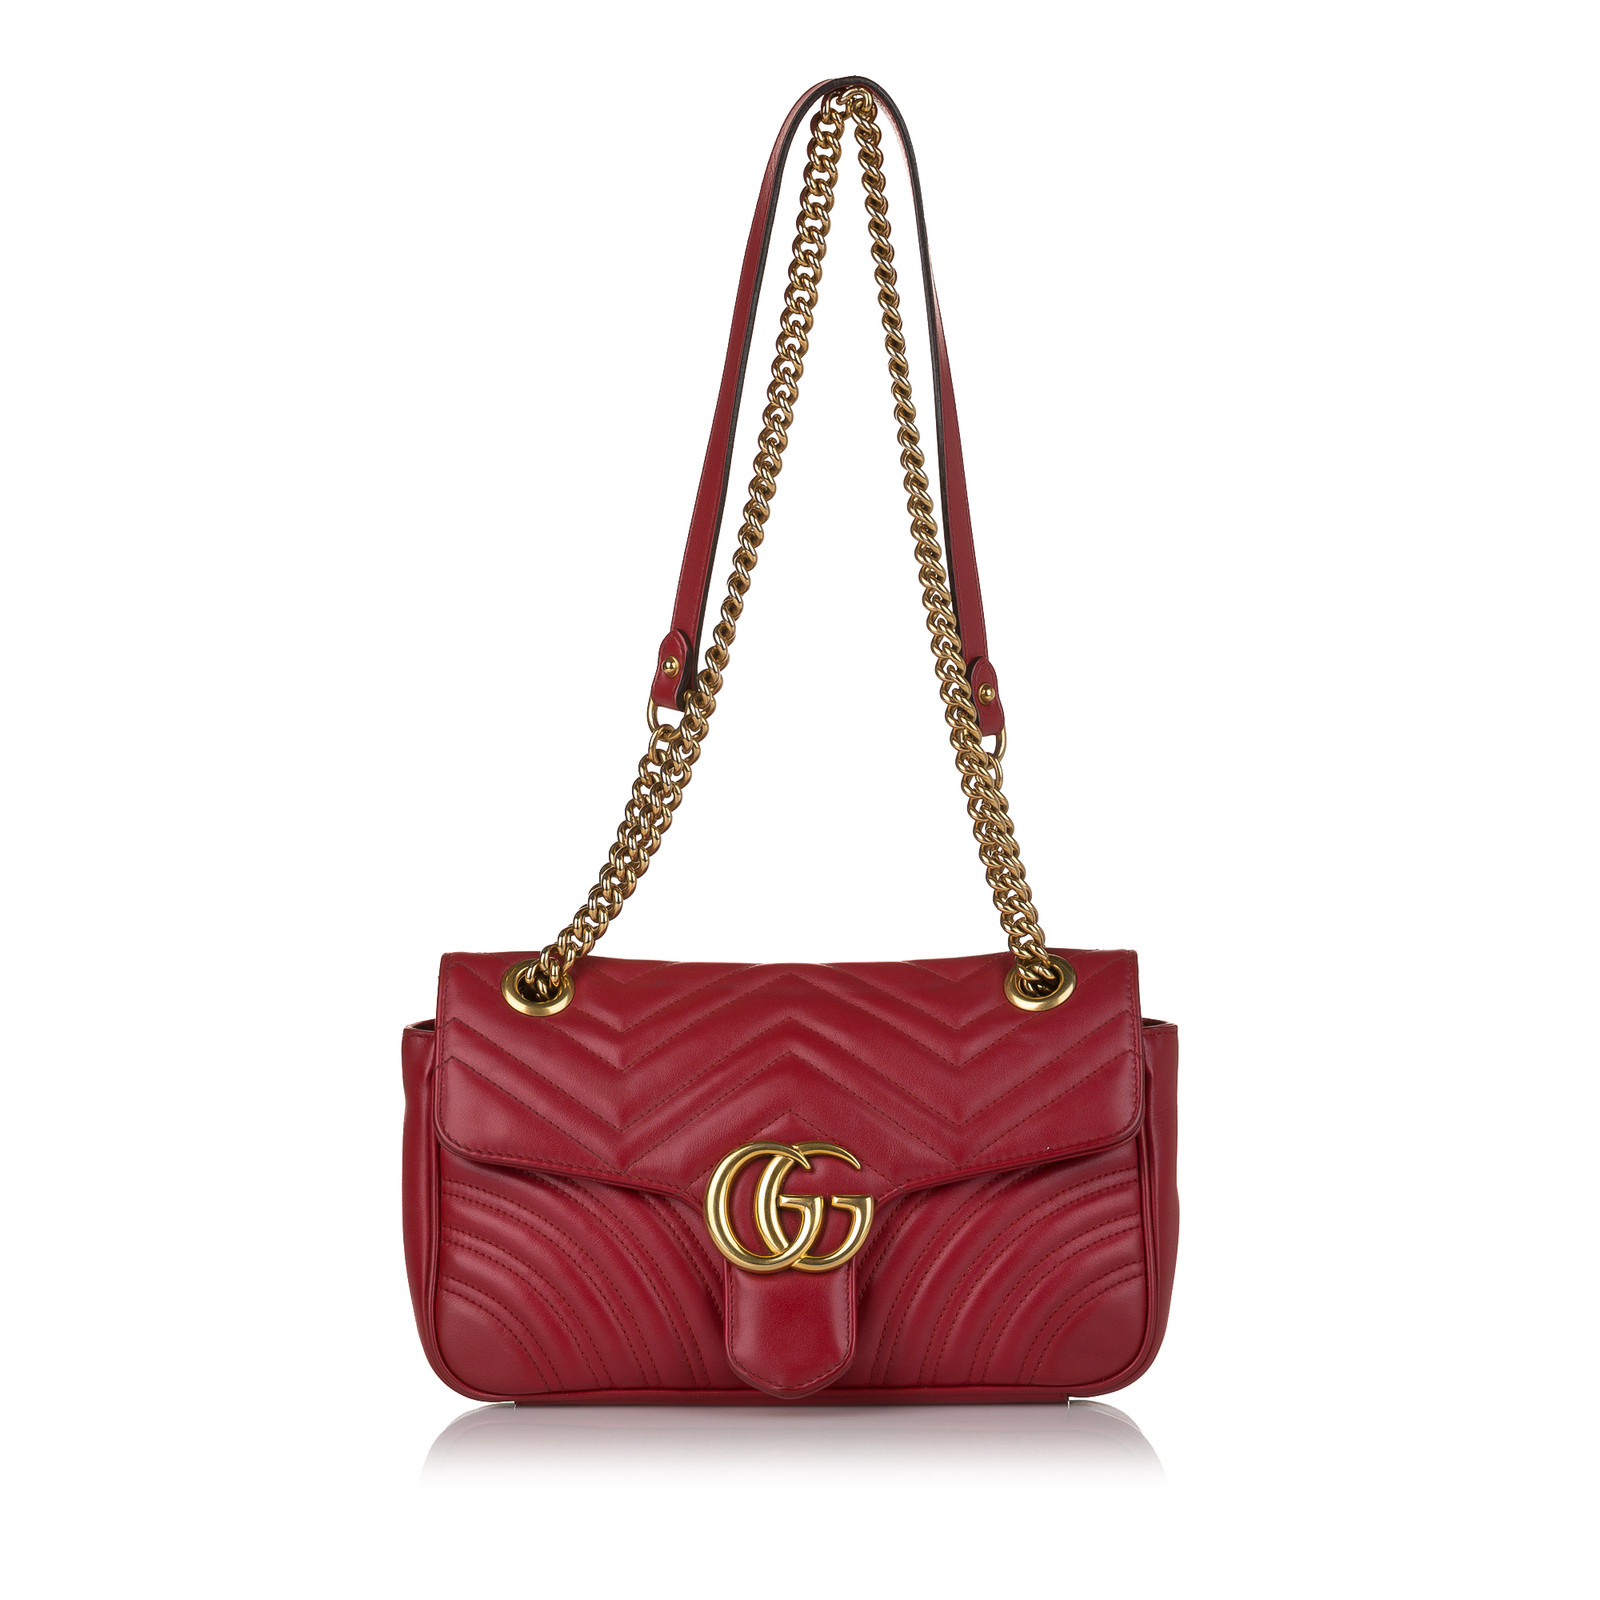 GUCCI Women's GG Marmont Flap Bag Normal aus Leder in Rot